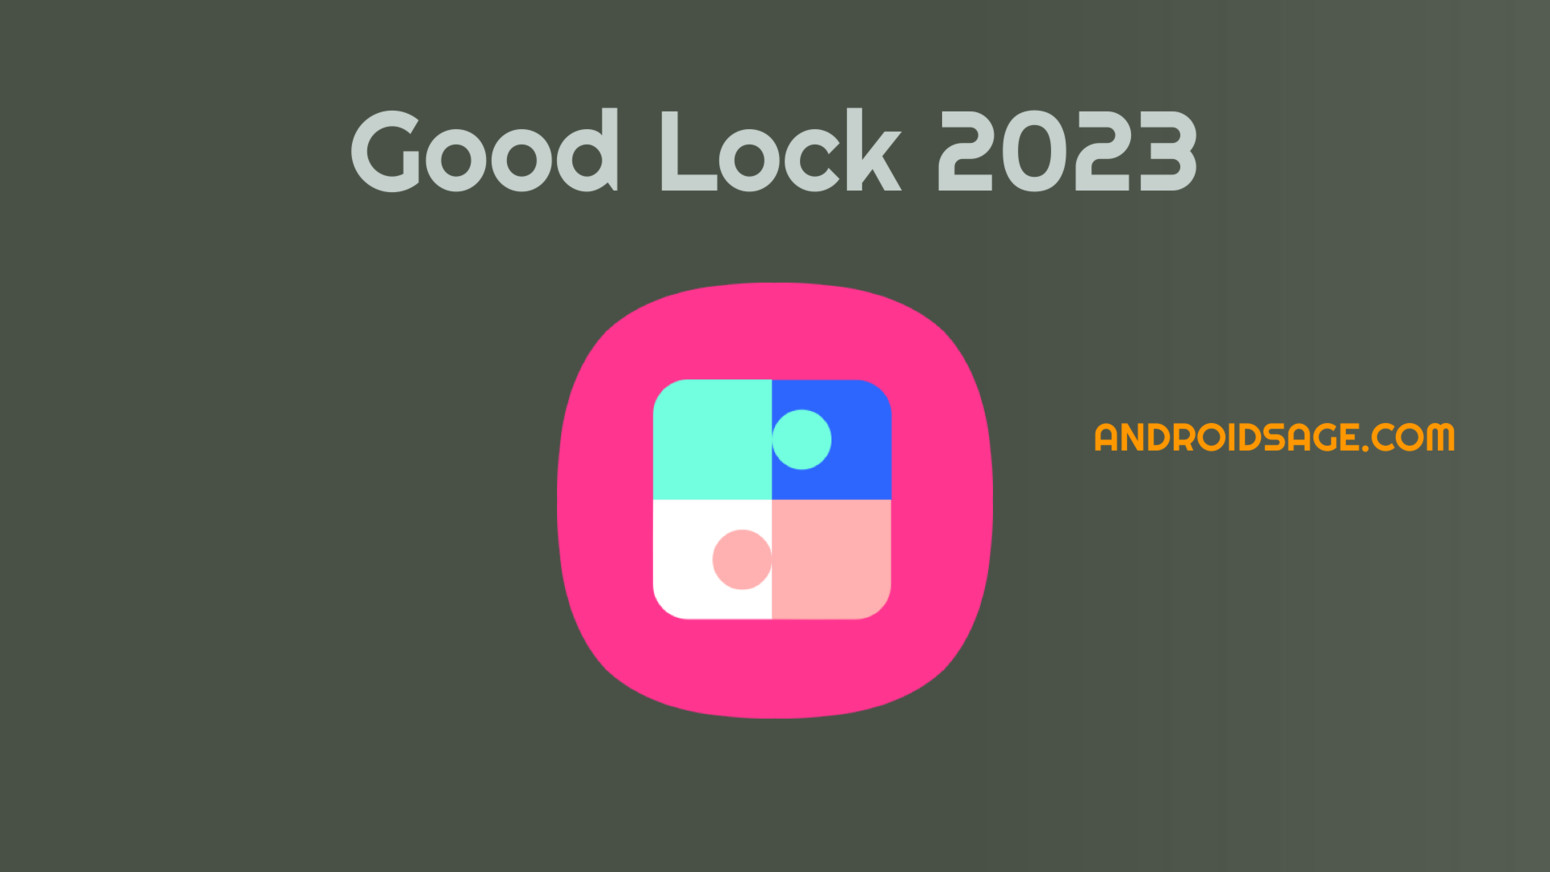 Samsung Good Lock 2023 Features and Changelog